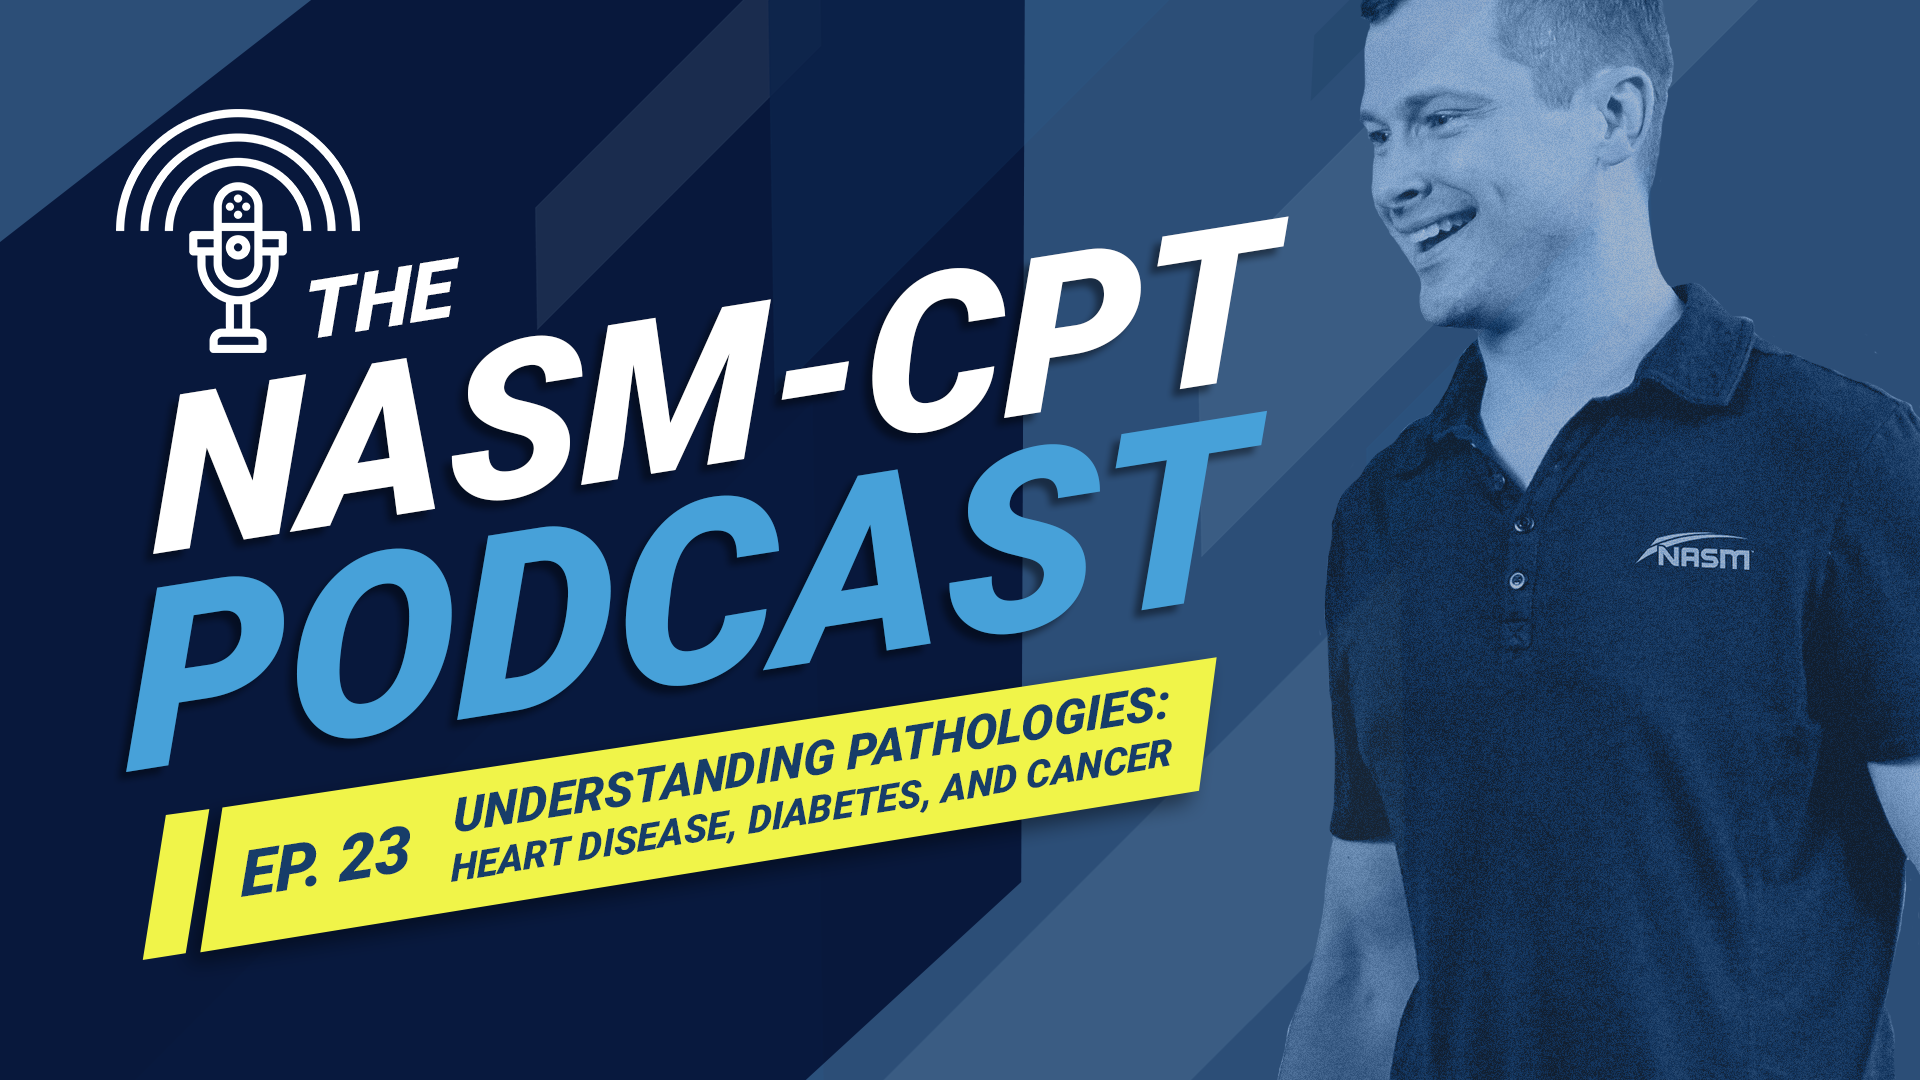 Sportstraining-Weightloss-CPT Podcast Ep. 3